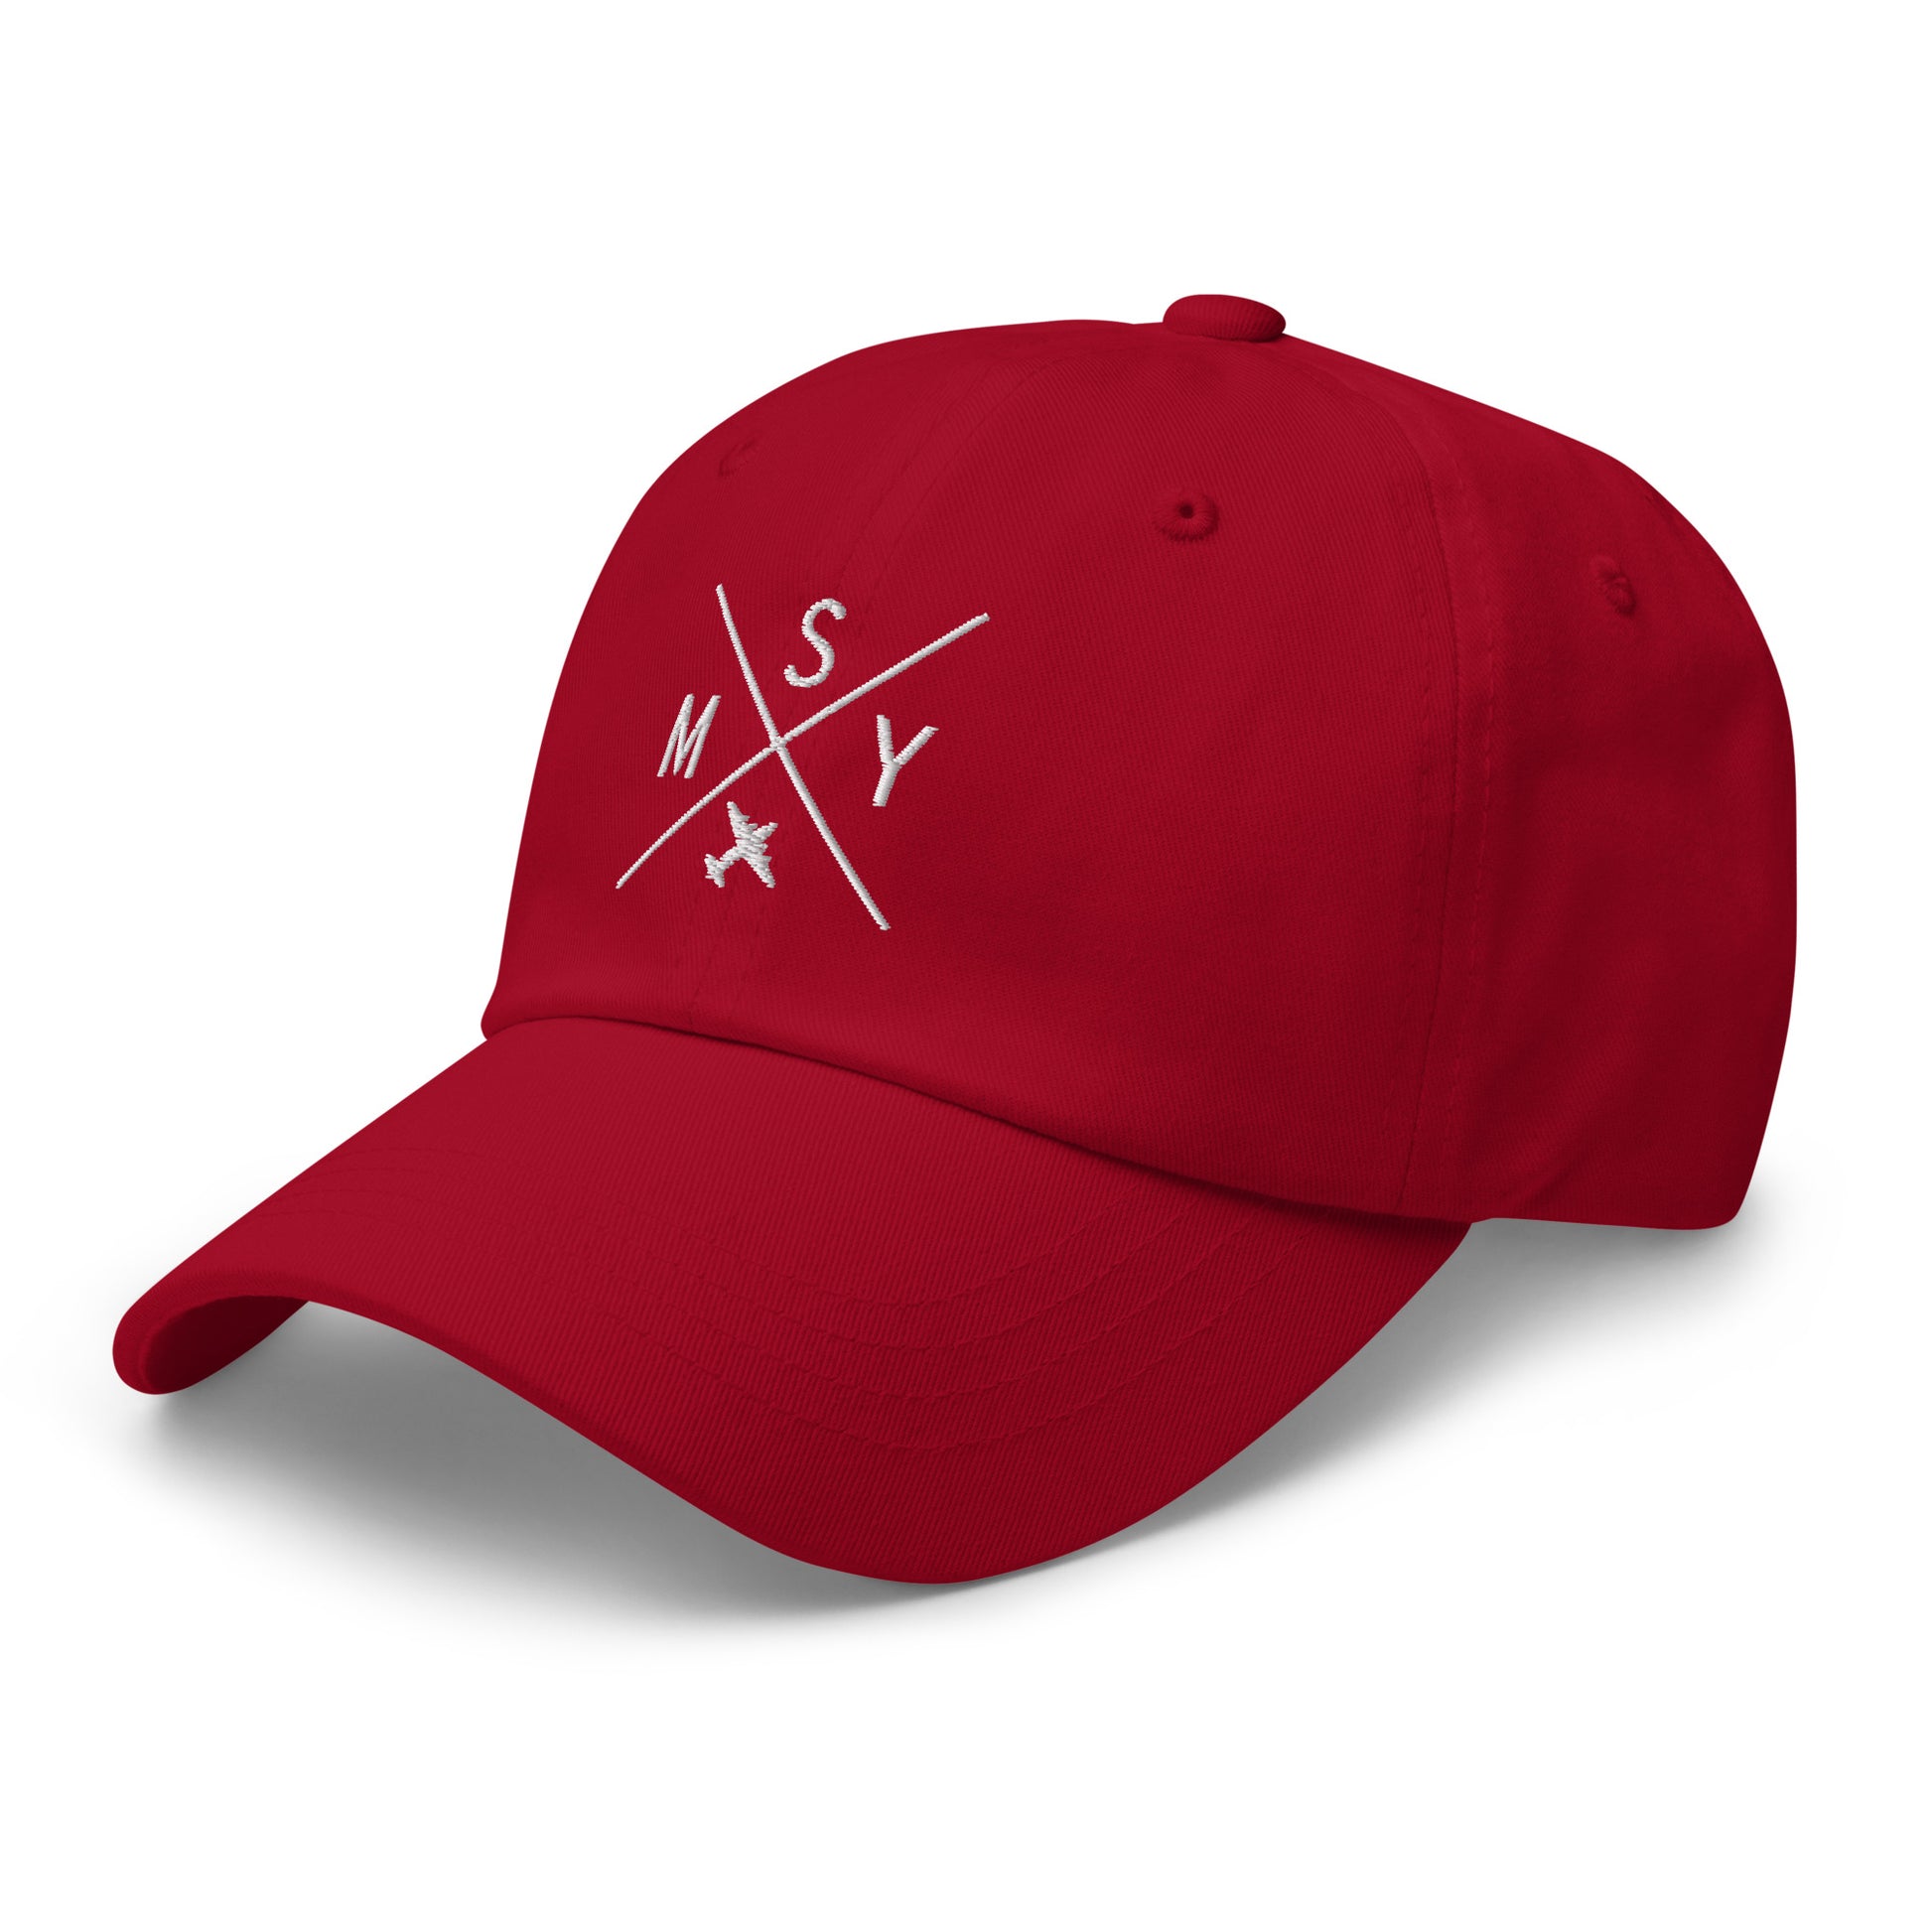 Crossed-X Dad Hat - White • MSY New Orleans • YHM Designs - Image 21